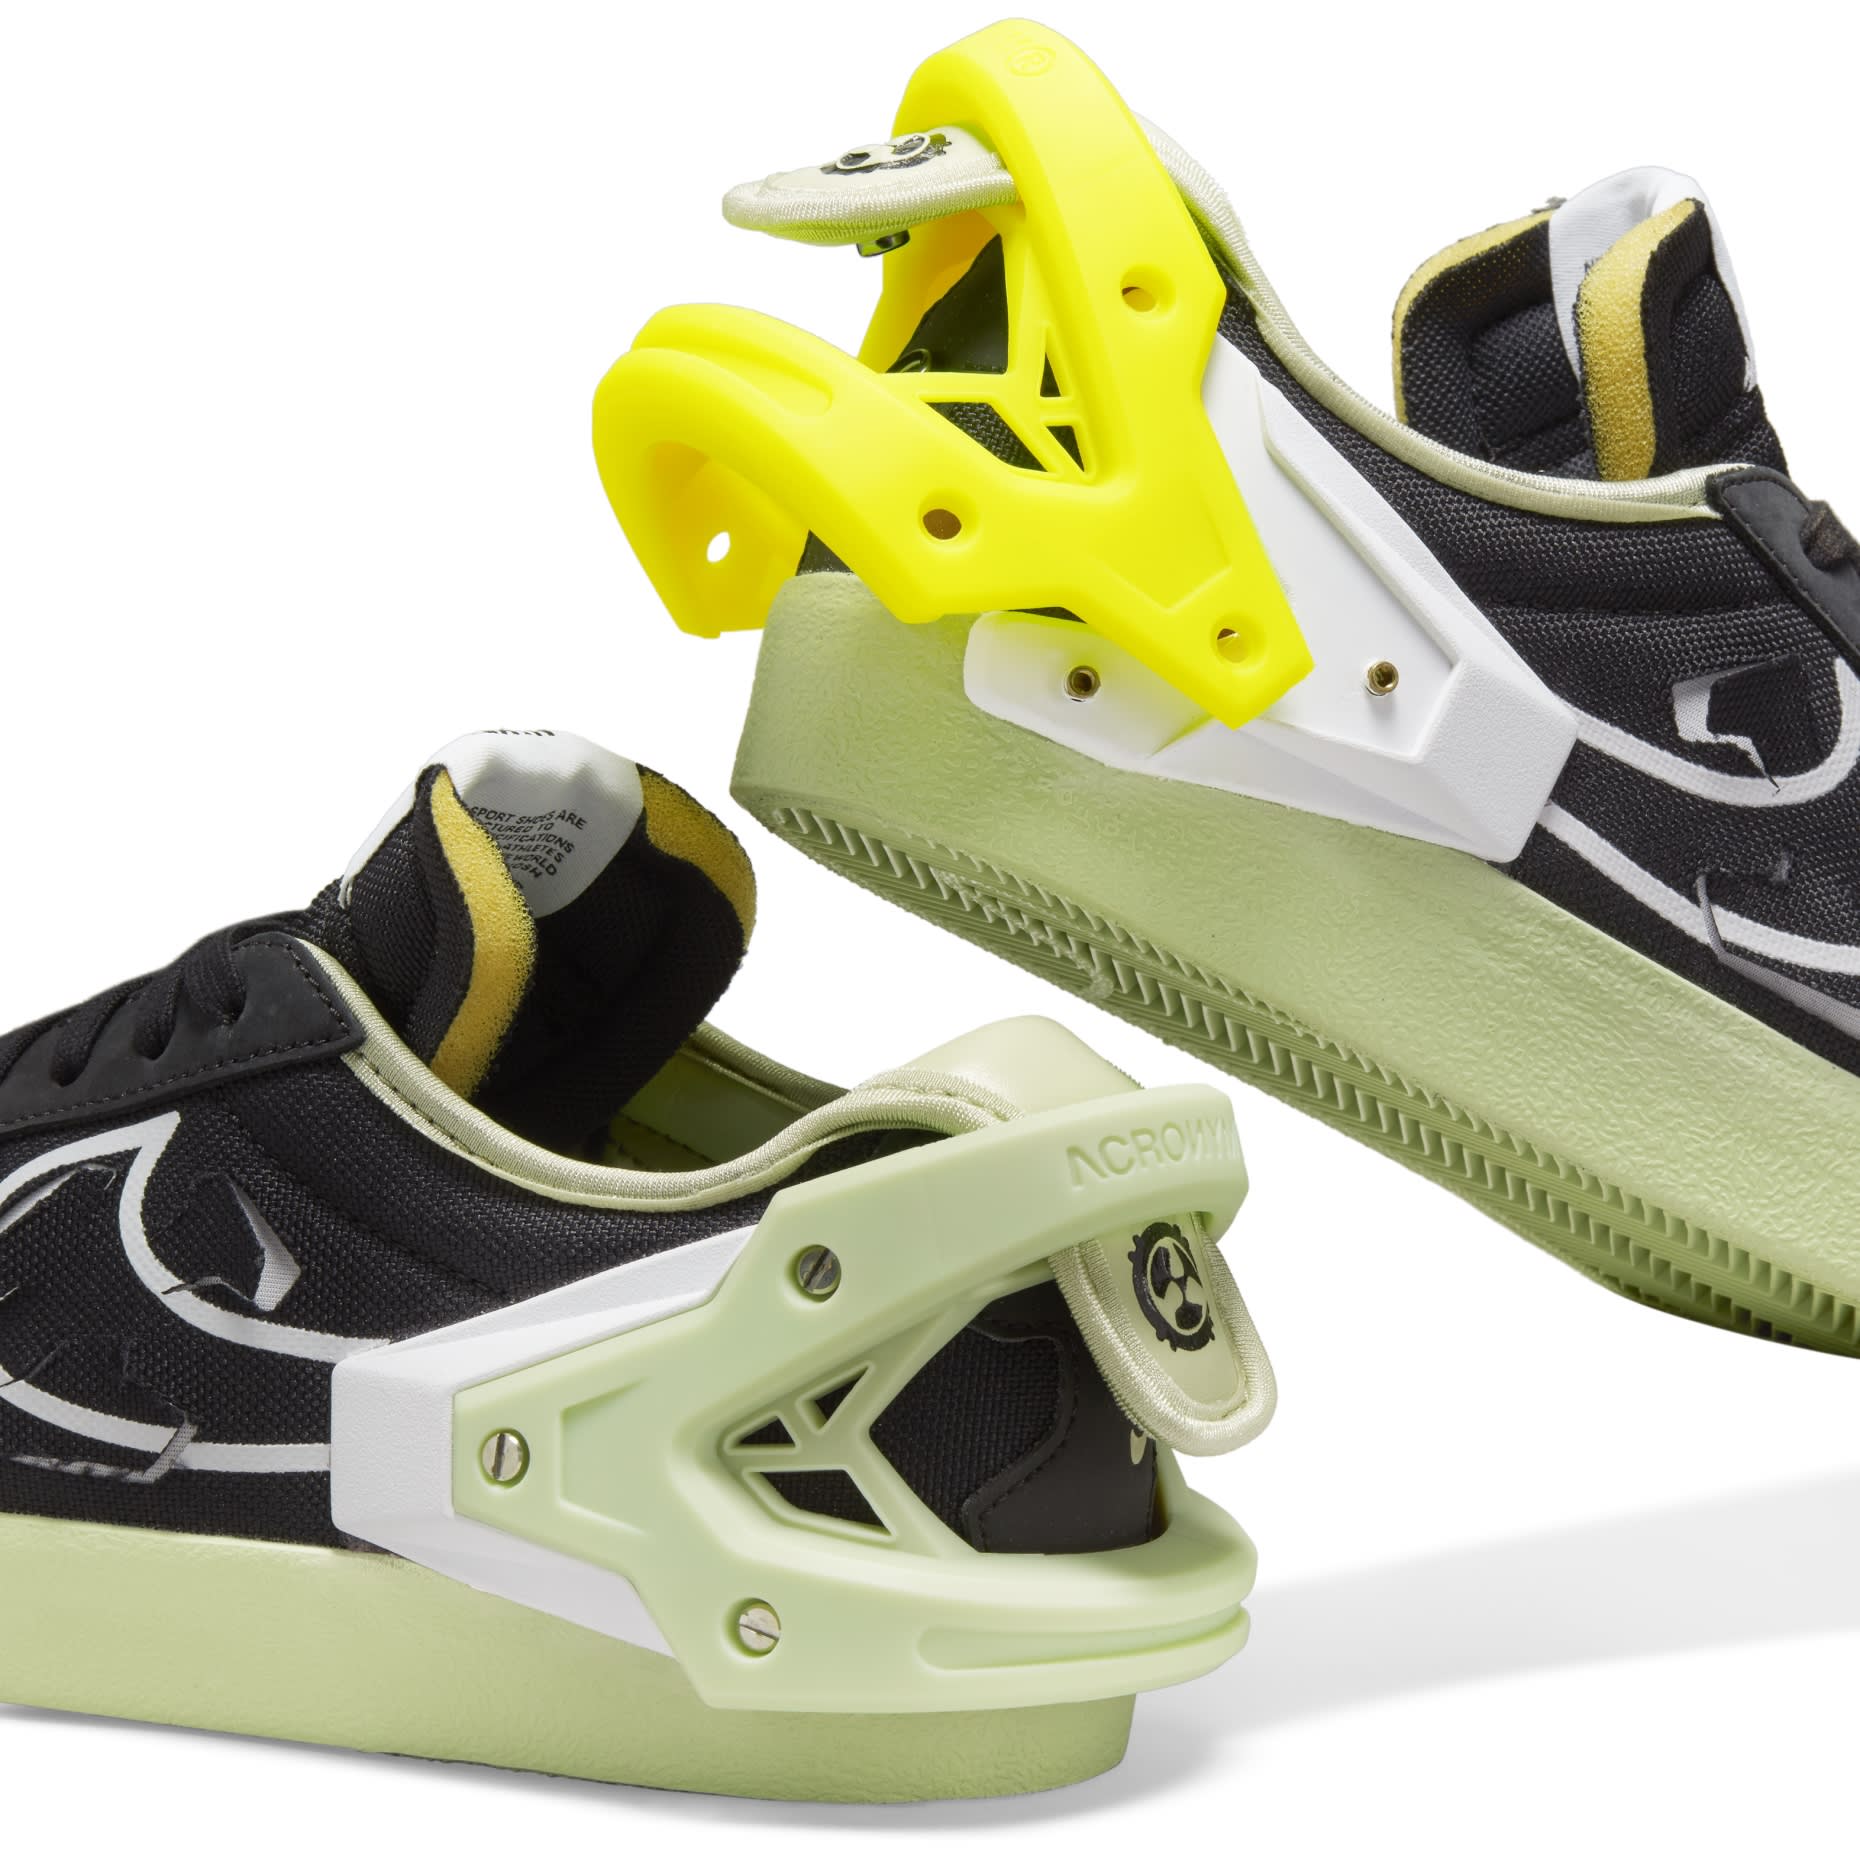 ACRONYM x Nike Blazer Low Collab 2022 Release Date | Sole Collector